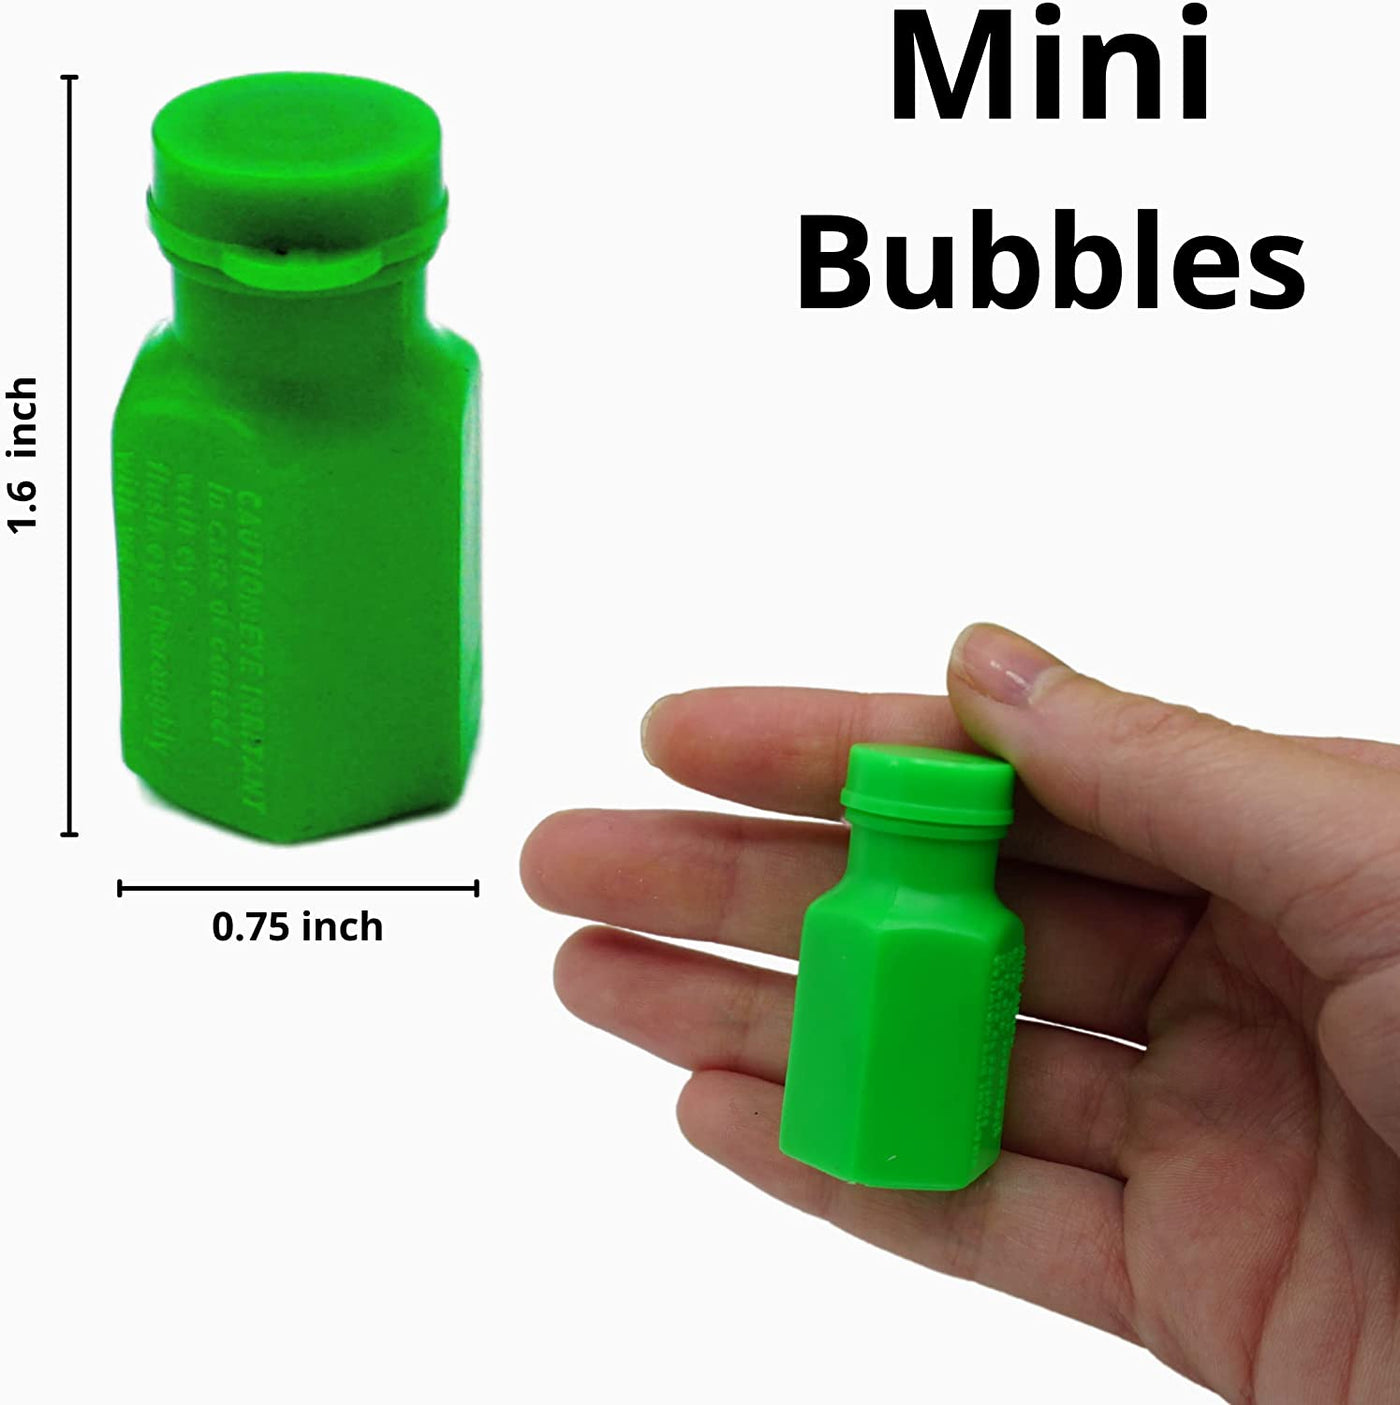 Mini Bubbles Bulk [48 Pack] 1.6" Bubble Bottles Party Favors for Kids - Summer Pool Beach Toys, Goodie Bag Fillers by 4E's Novelty